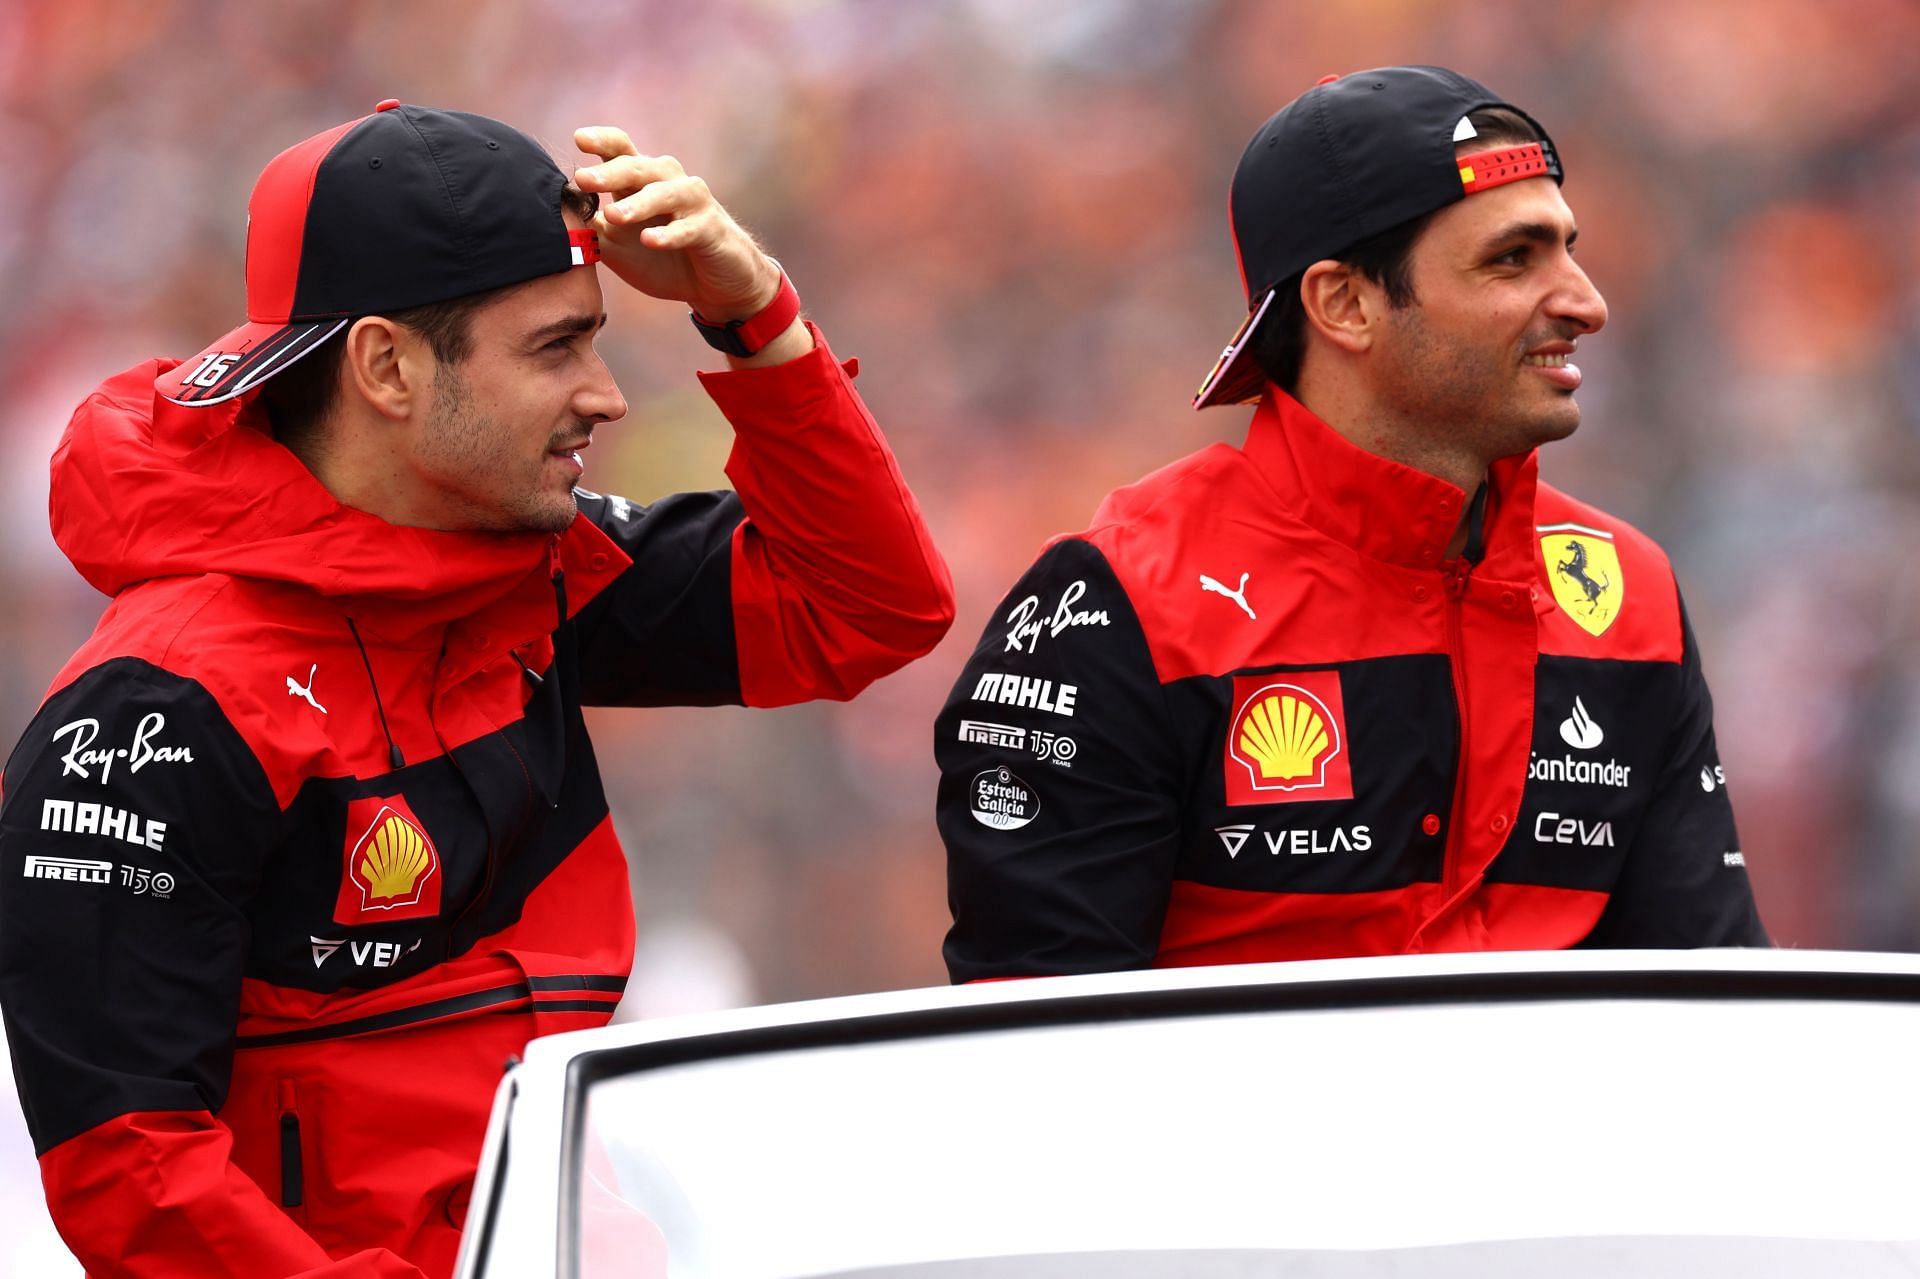 Ferrari&#039;s biggest problem is the lack of faith of both the drivers in the team strategy